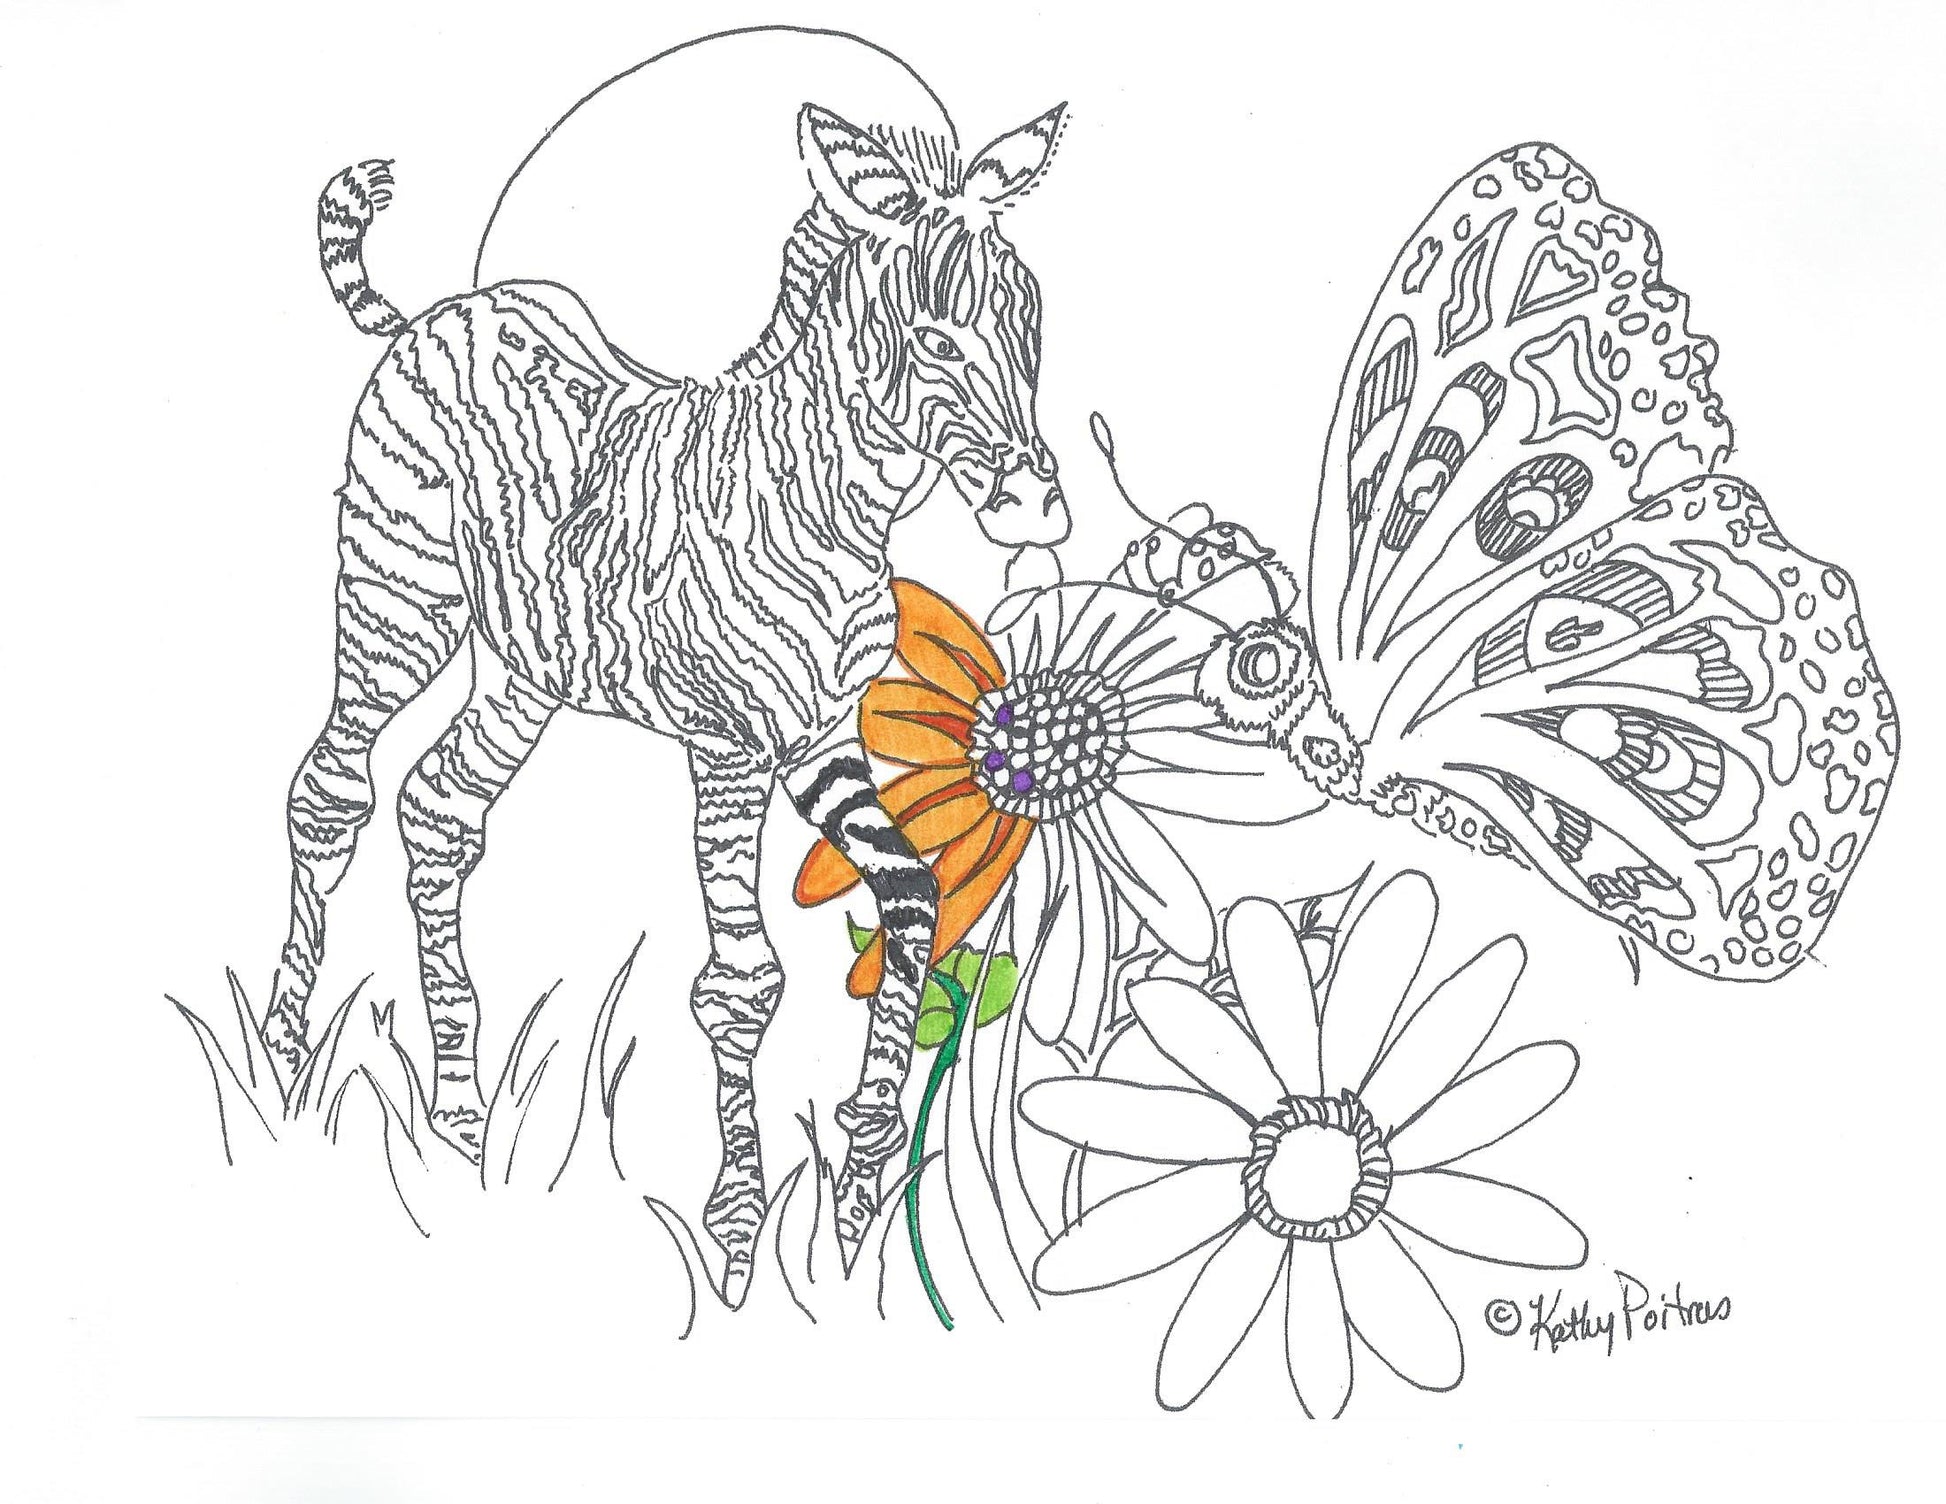 Coloring page of a baby zebra, giant butterfly, and ladybug with daisies. 